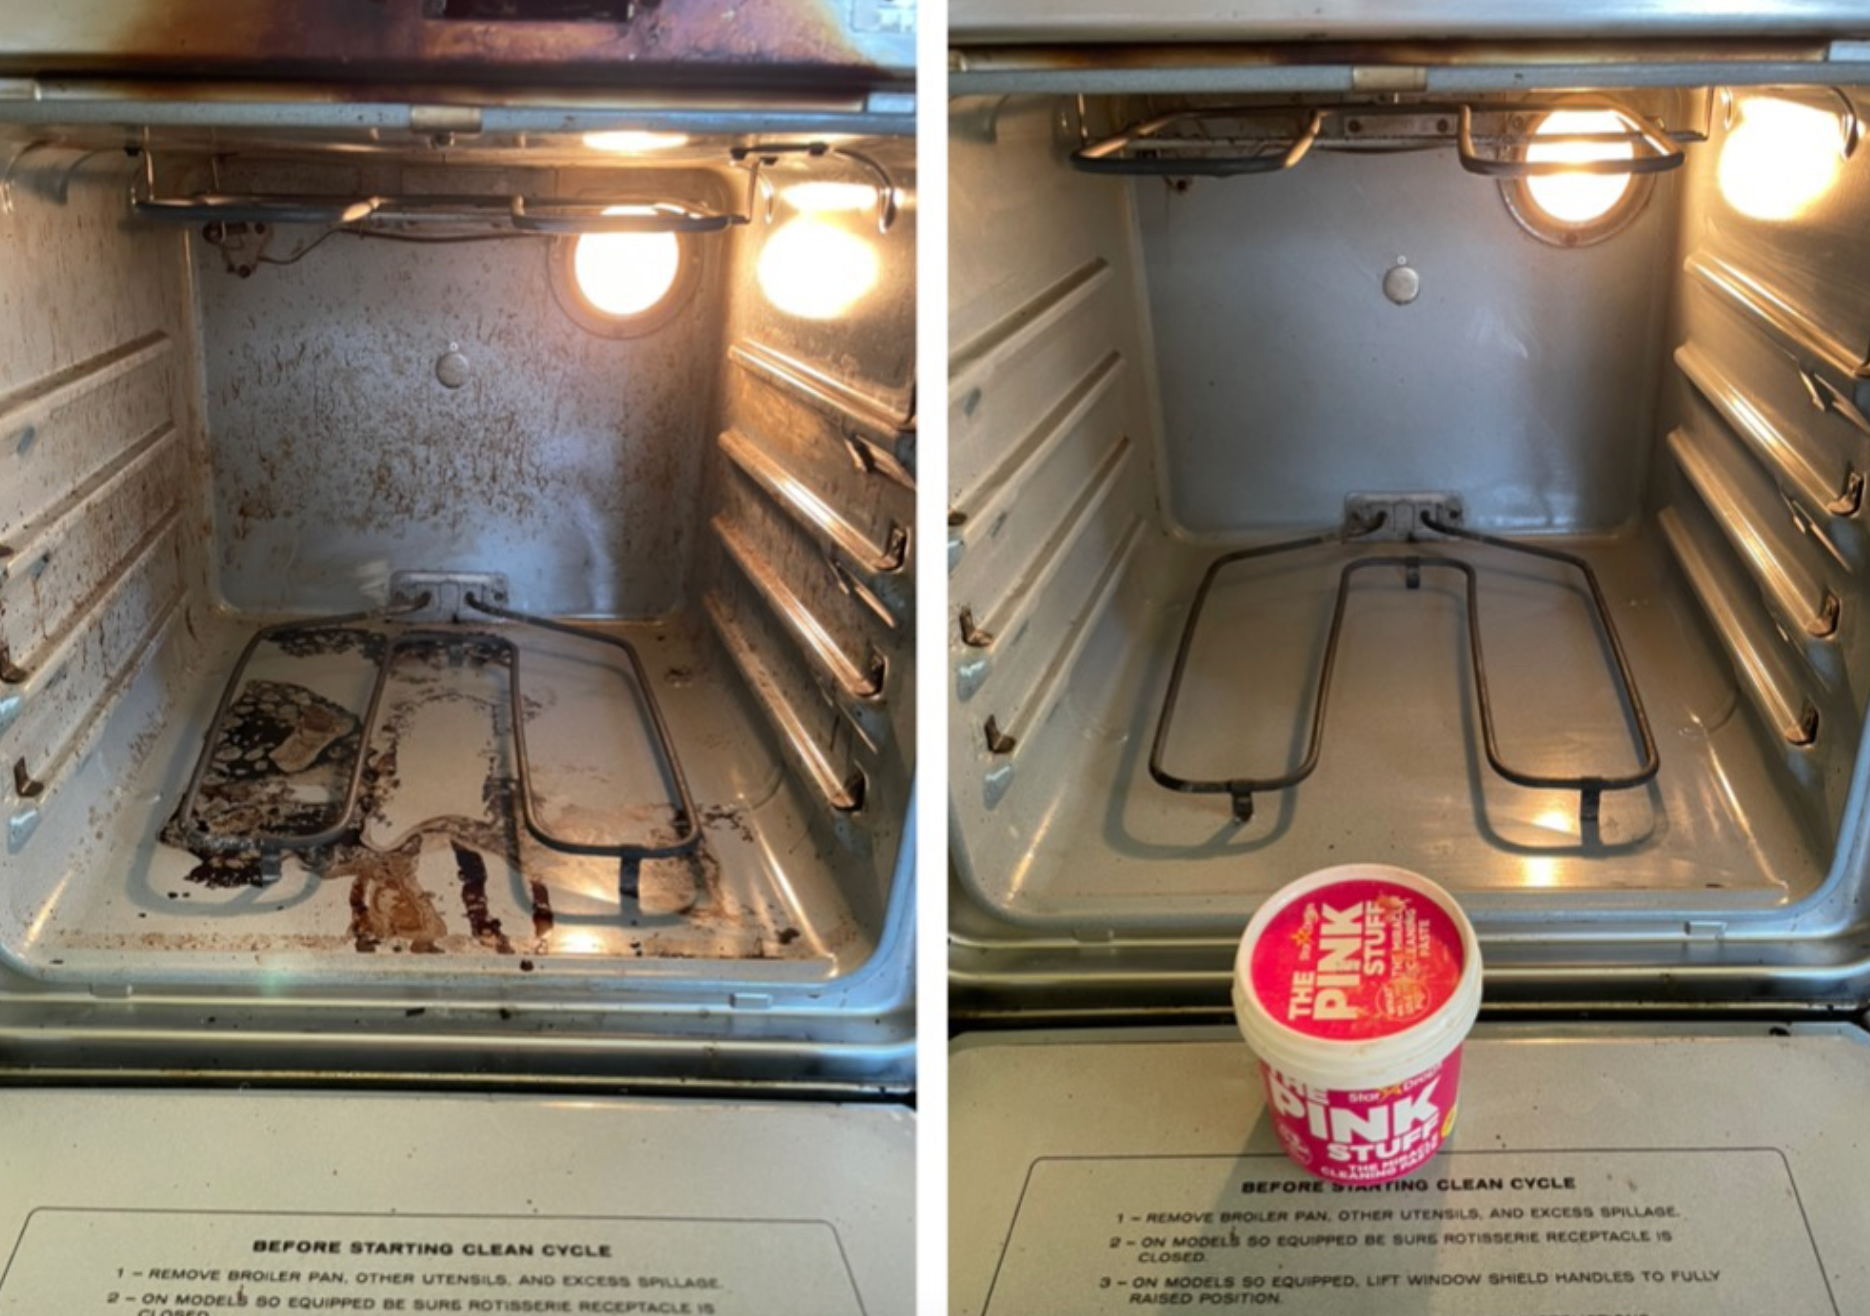 on the left the inside of a reviewer's oven looking dirty and the on the right the same oven now looking clean after using the pink stuff